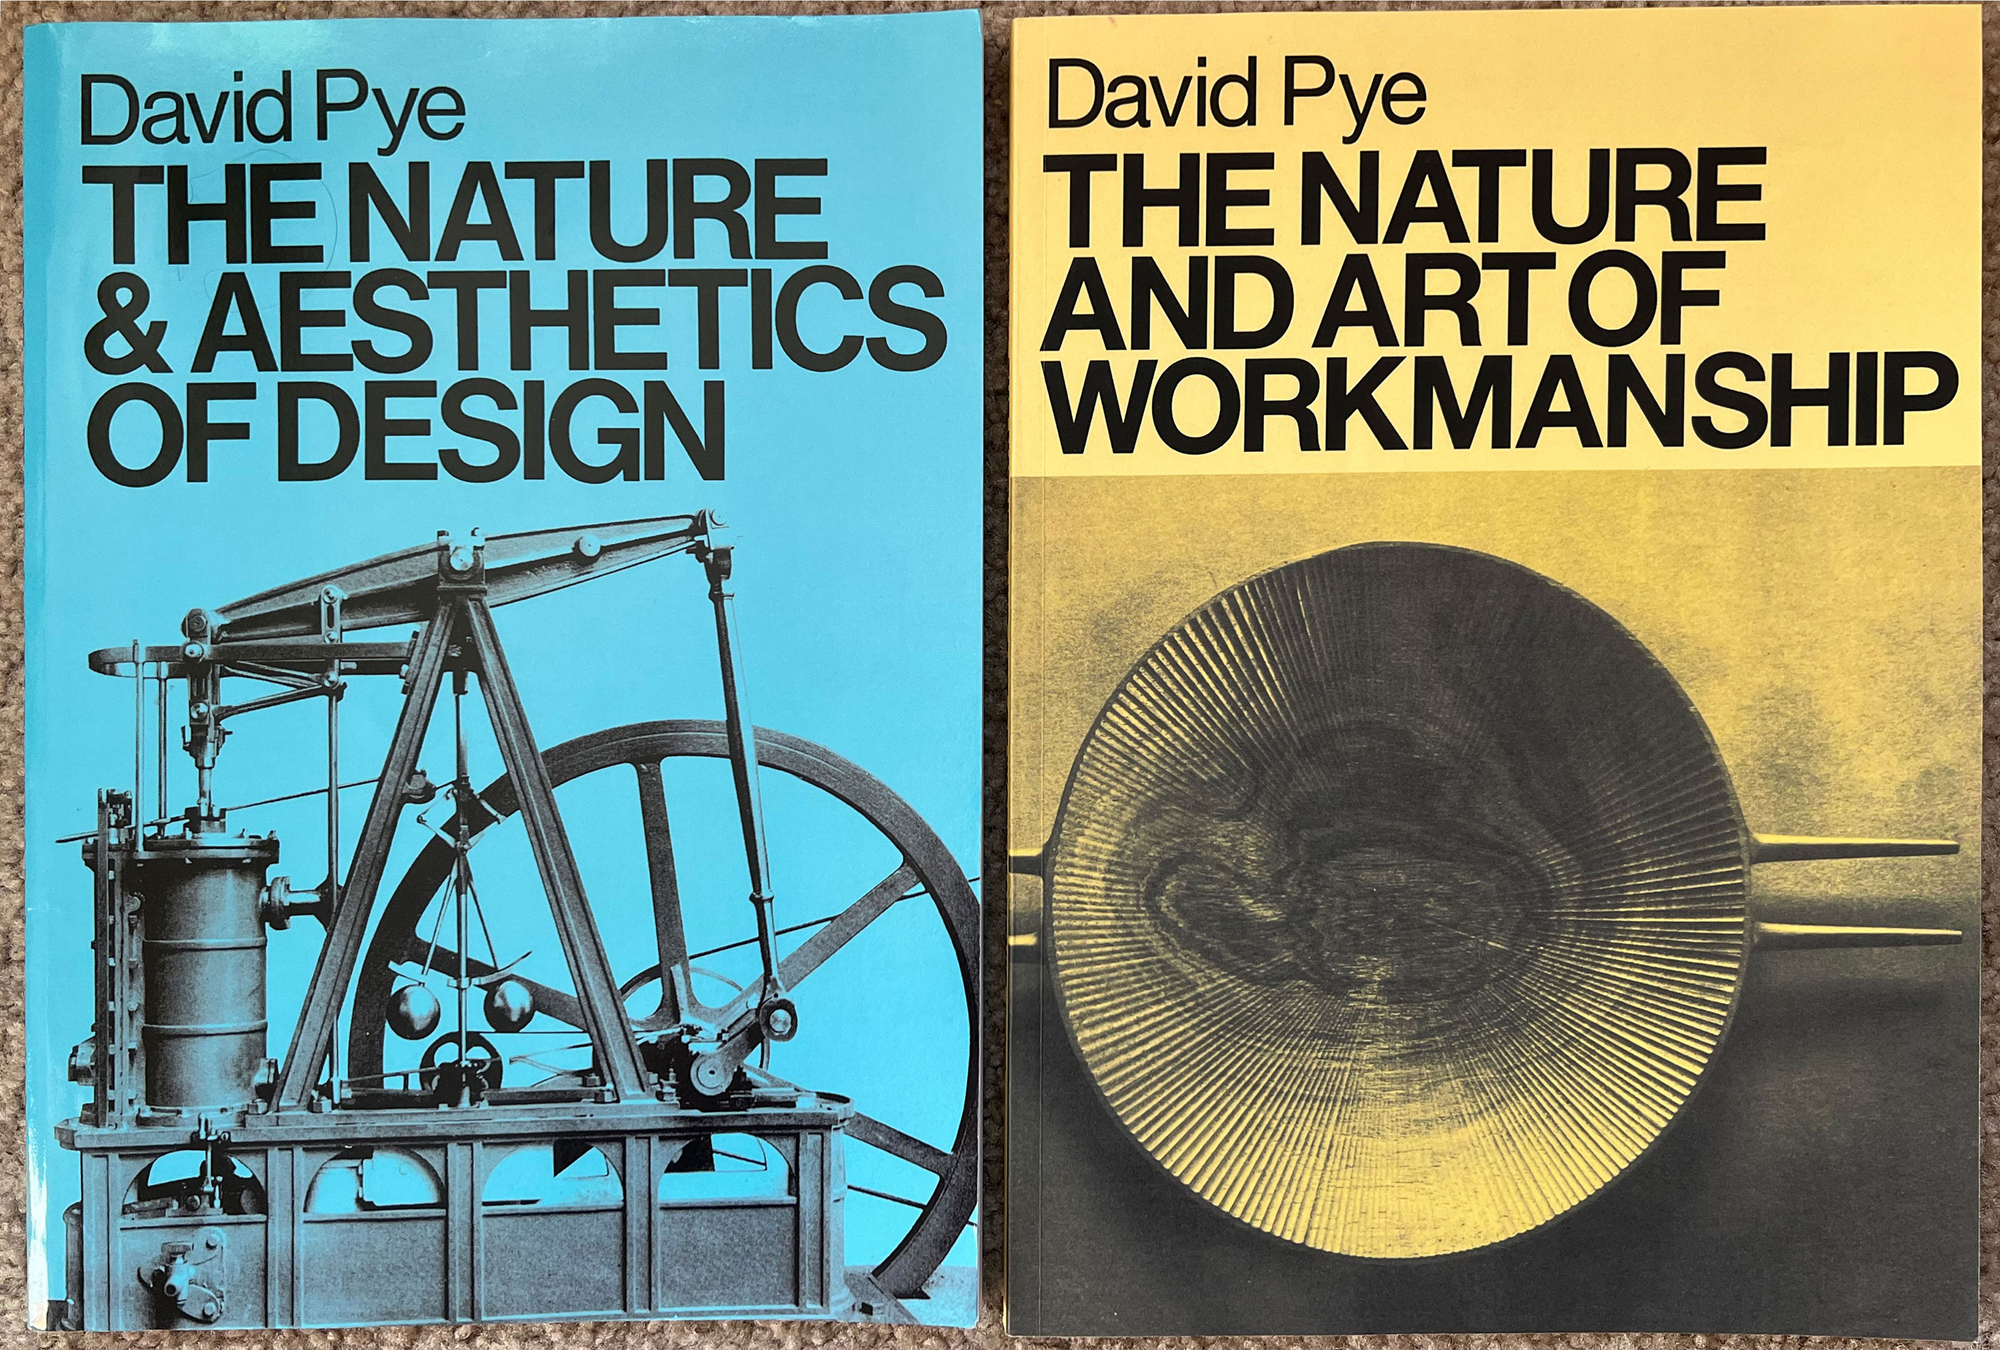 David Pye The Nature and Aesthetics of Design and The Nature and Art of Workmanship.